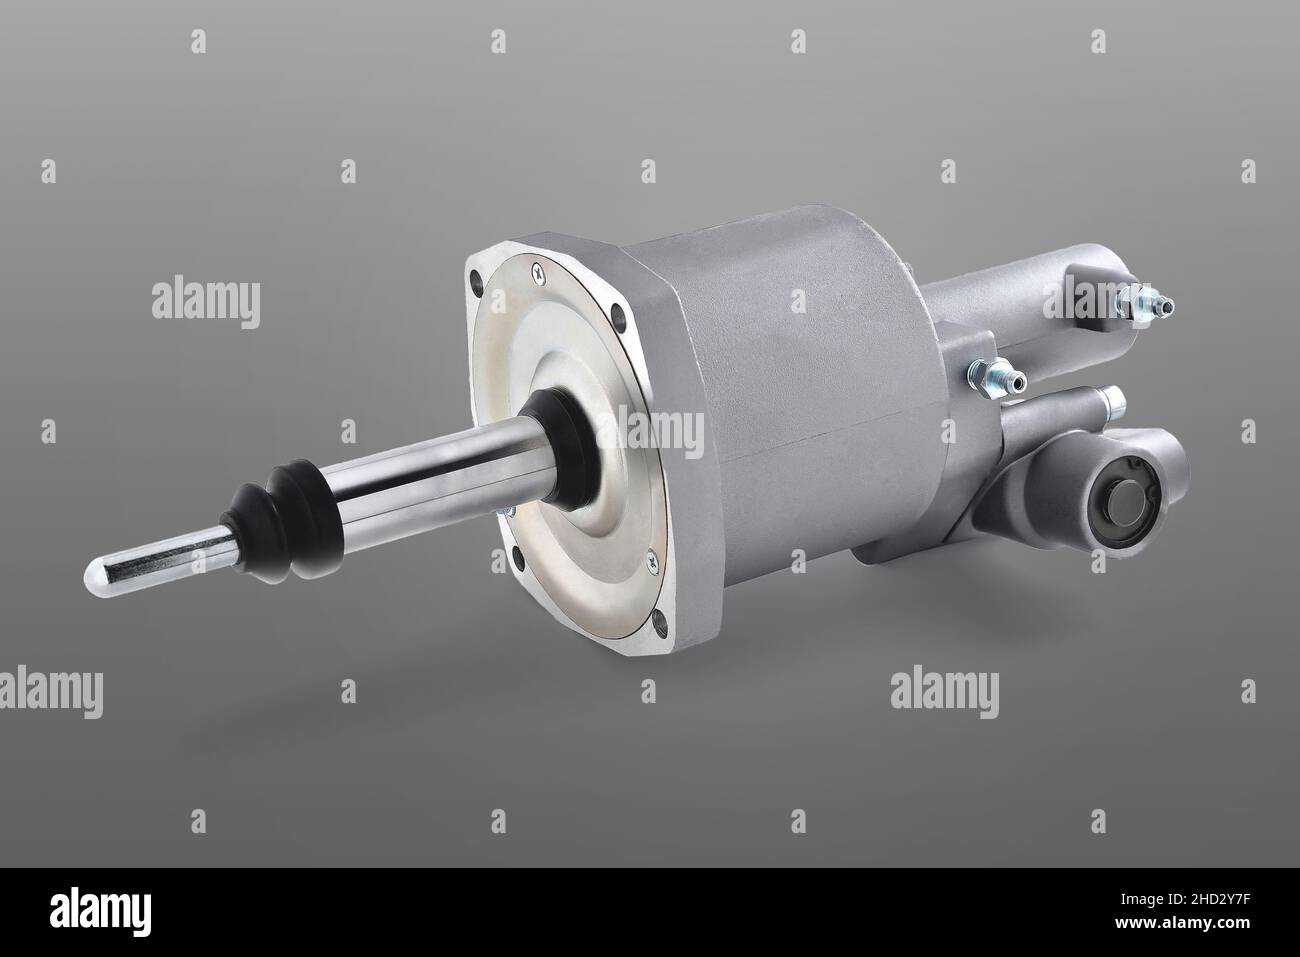 brake master cylinder, air-hydraulic brake booster car, truck brake system detail, gray background, close-up selective focus Stock Photo